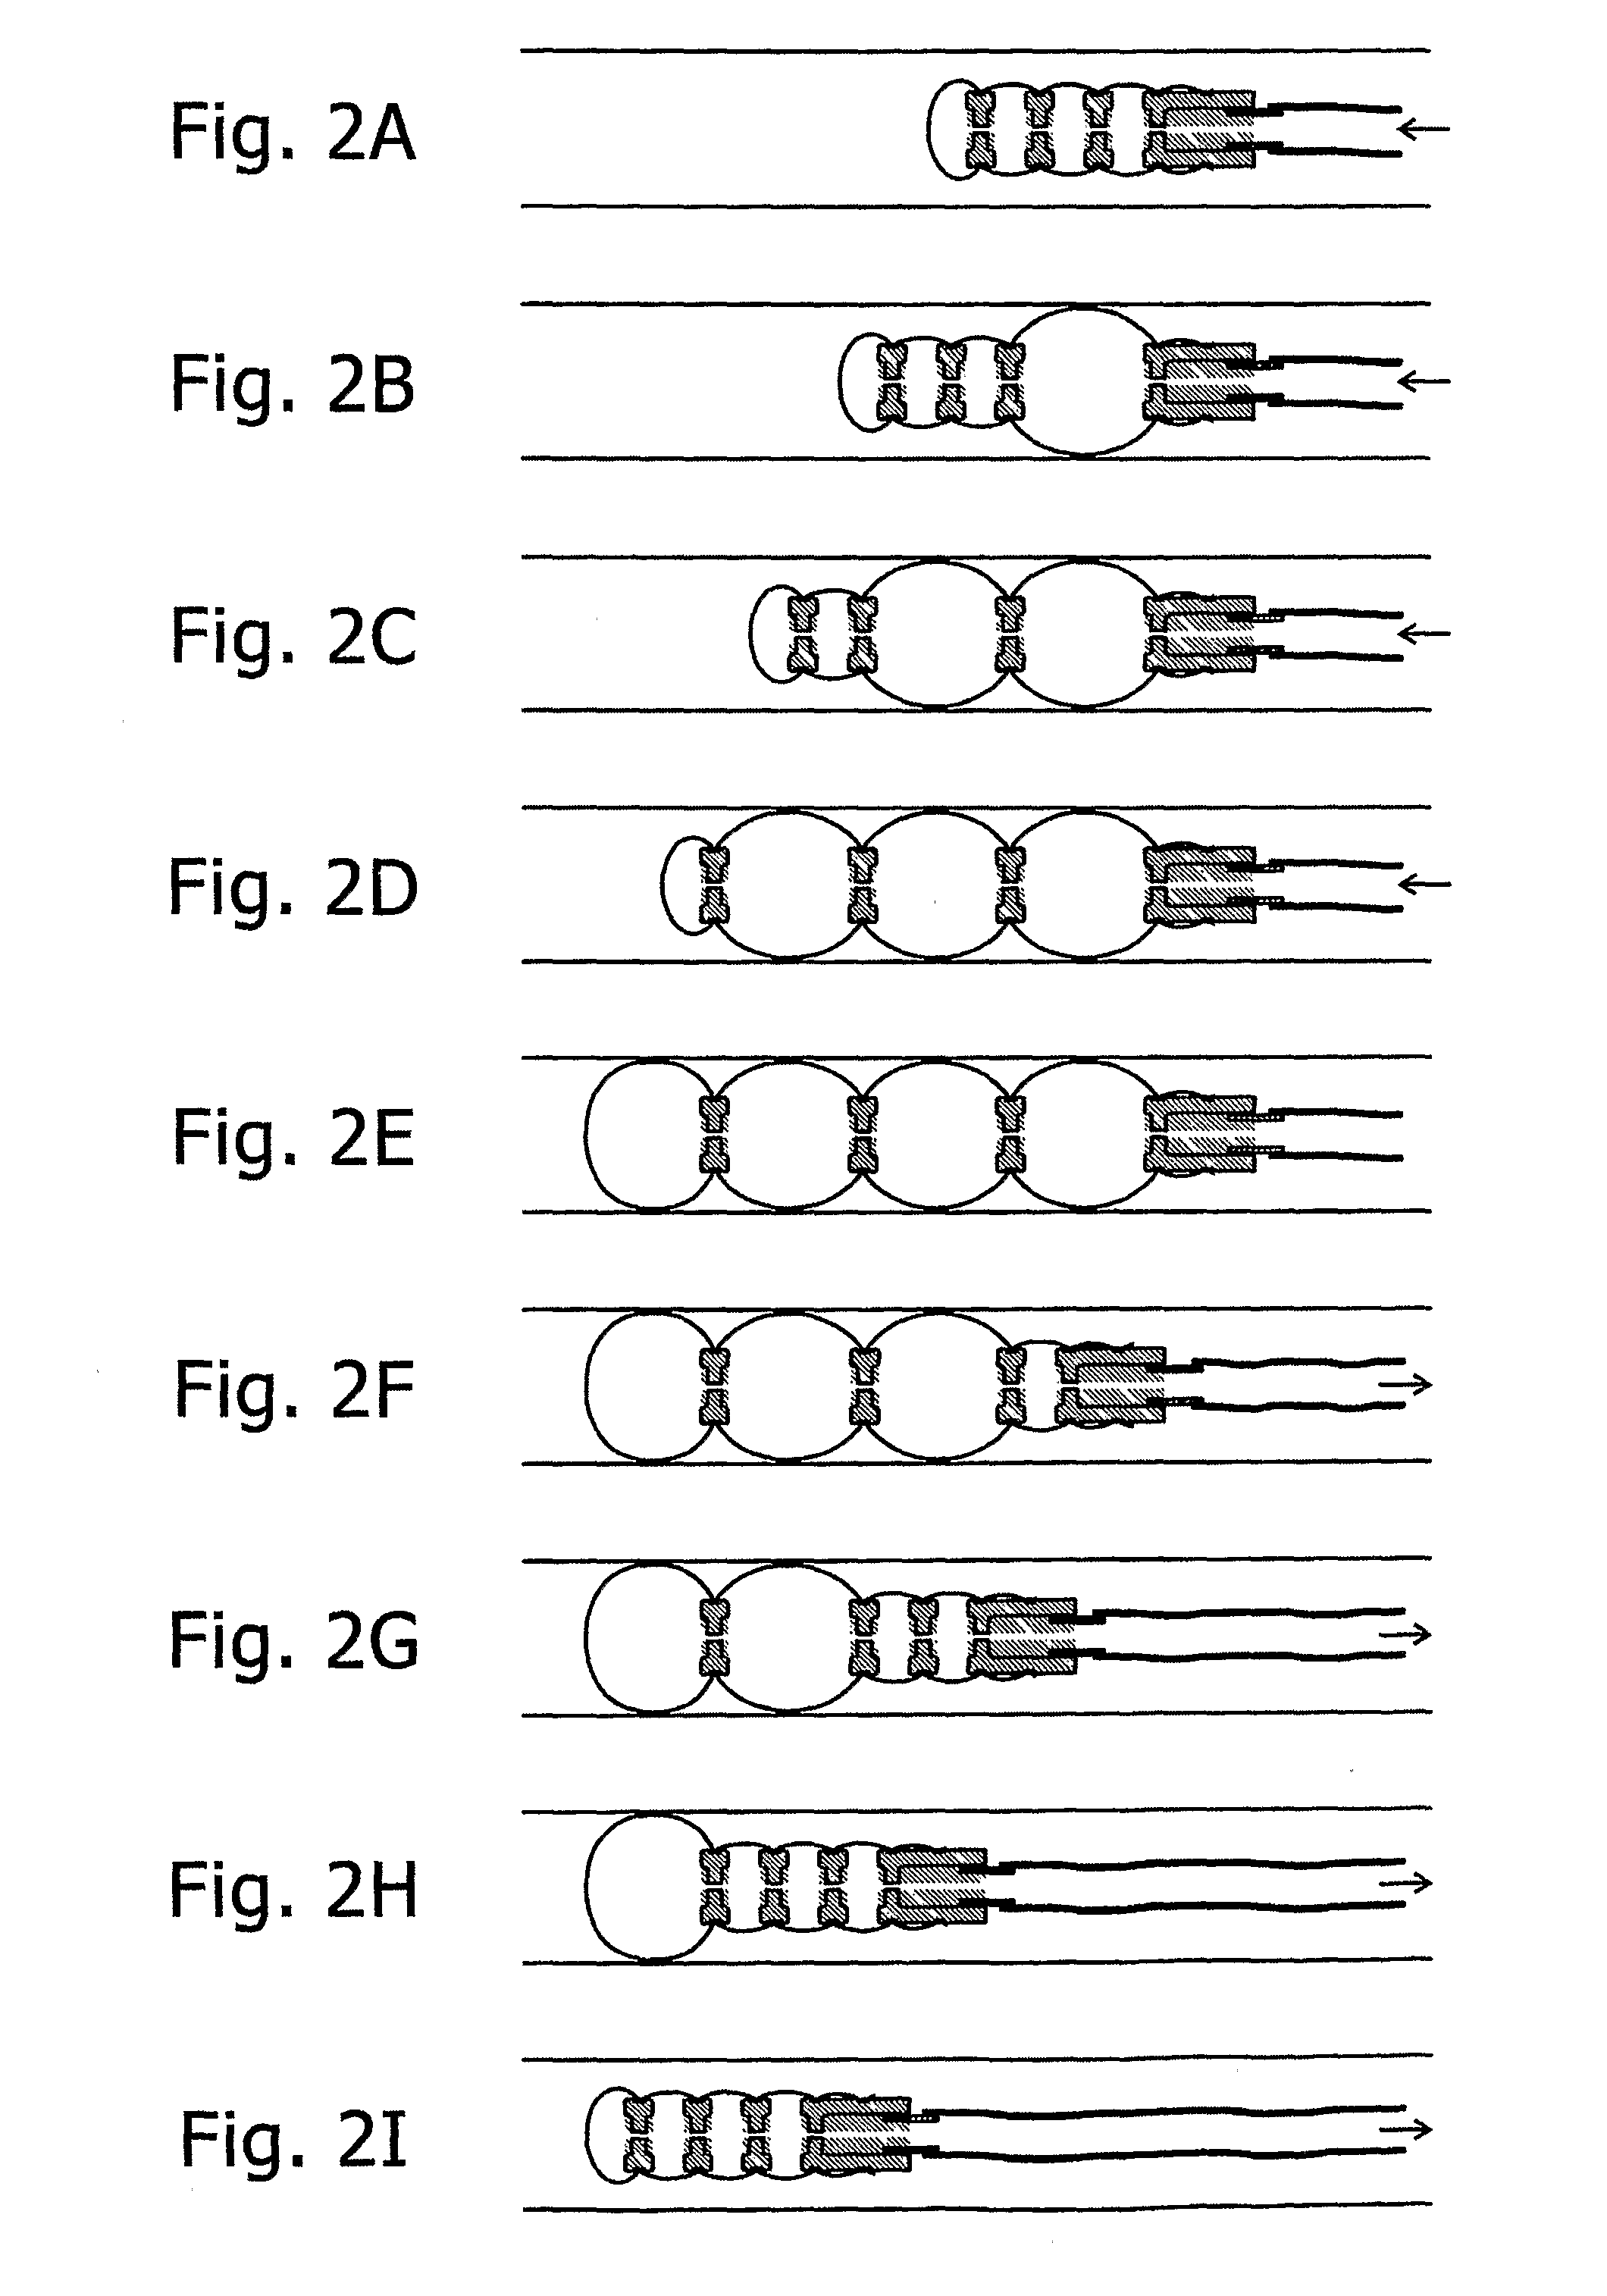 Inflatable chamber device for motion through a passage